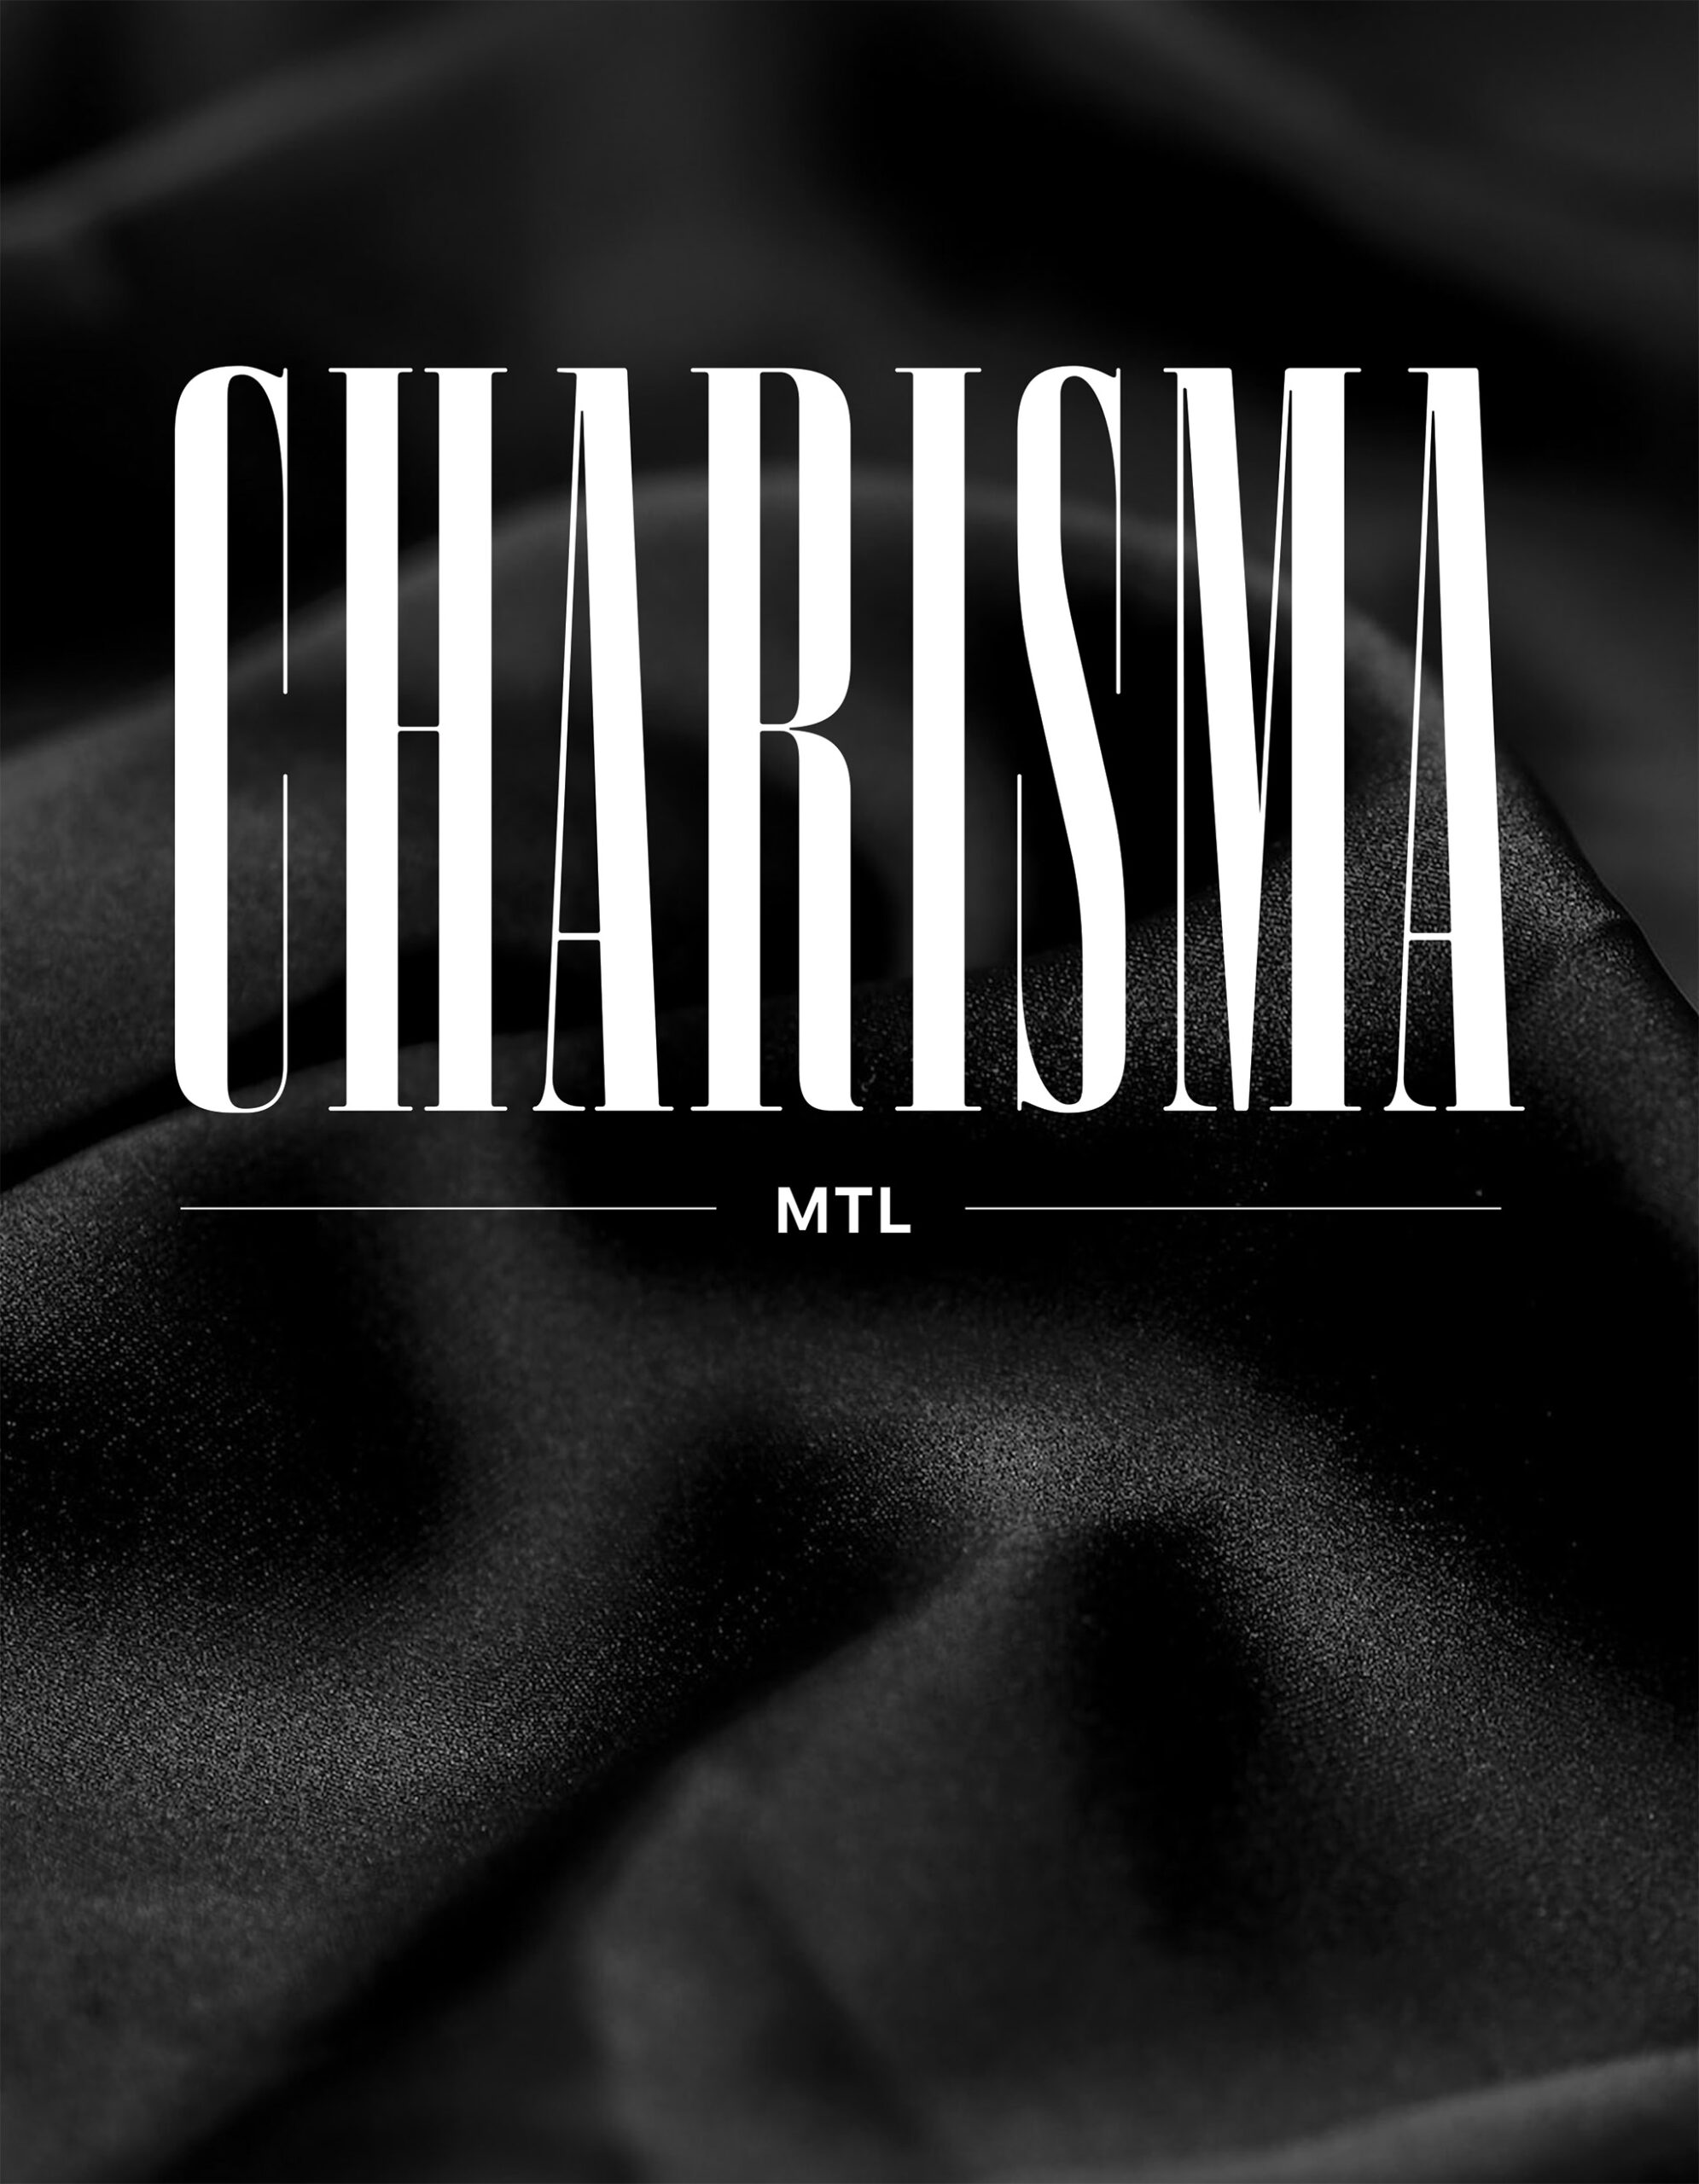 19. This is the magazine cover design for the imagined Montreal-based fashion and lifestyle magazine named Charisma MTL. The white word mark is placed on a black textured background.